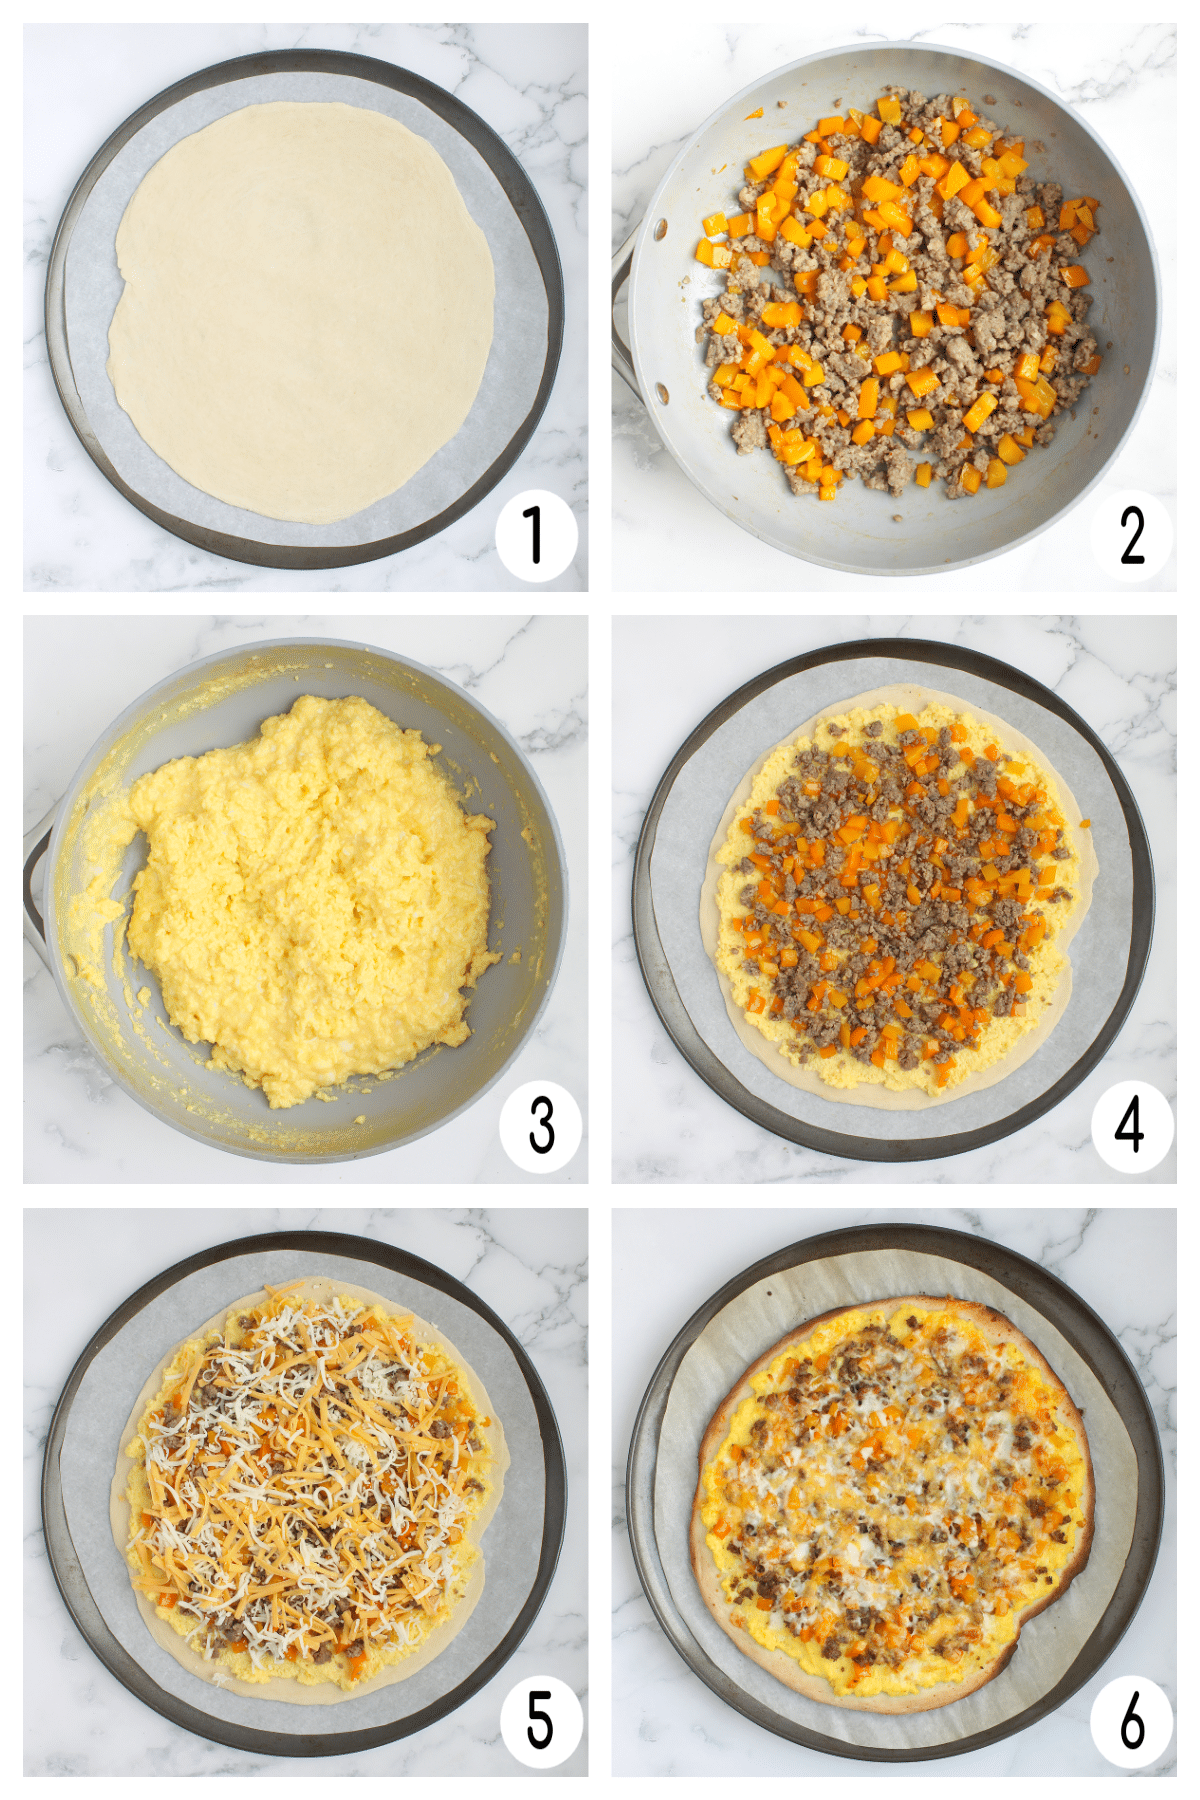 Process shots on how to make this breakfast pizza recipe.